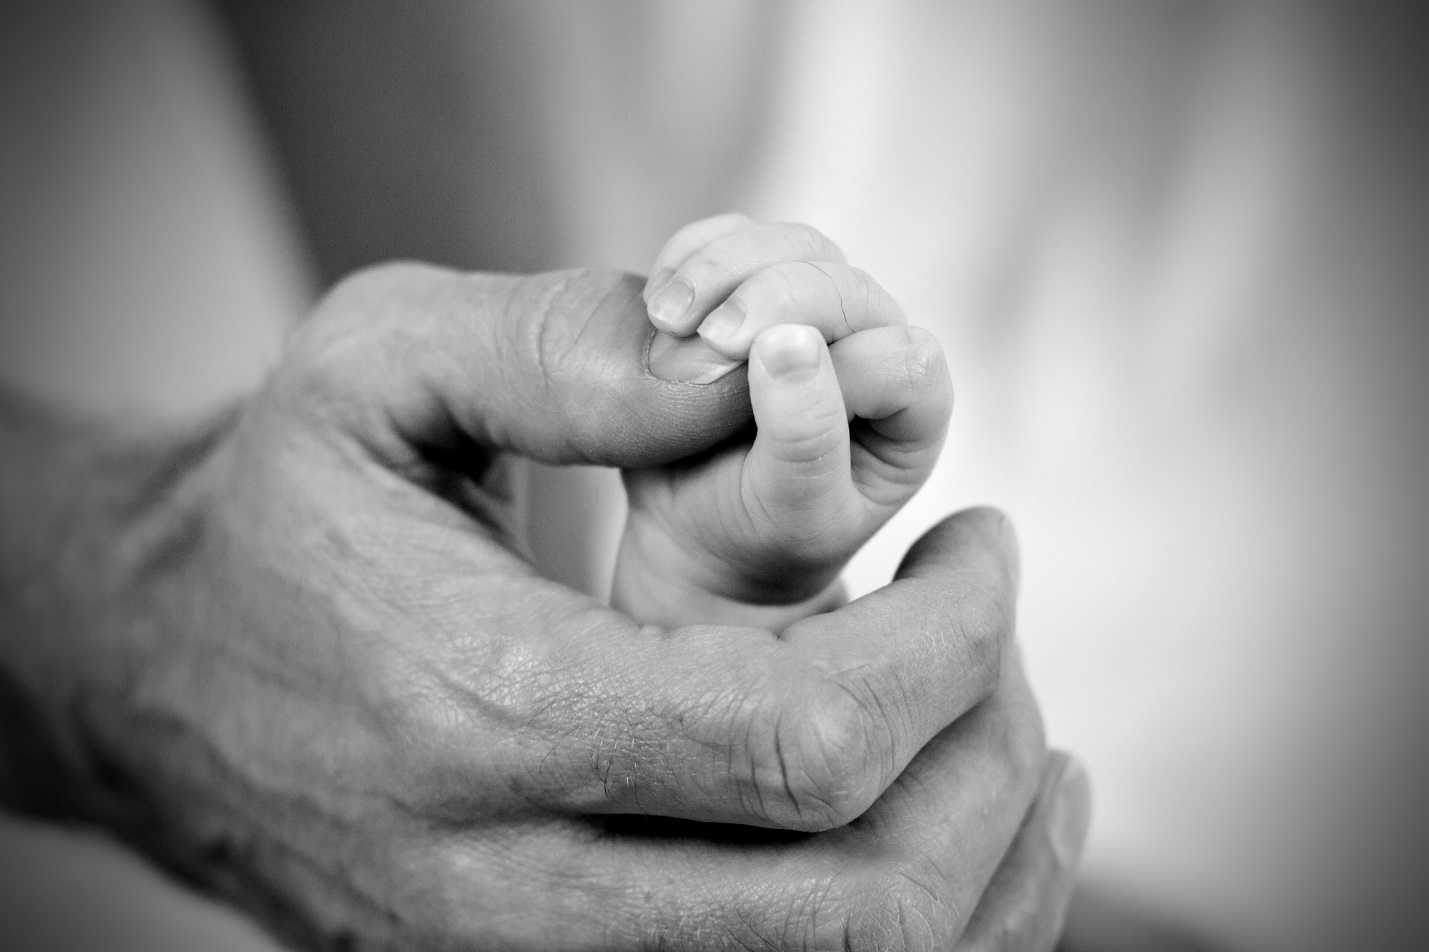 A close-up of a hand holding a baby's finger

Description automatically generated